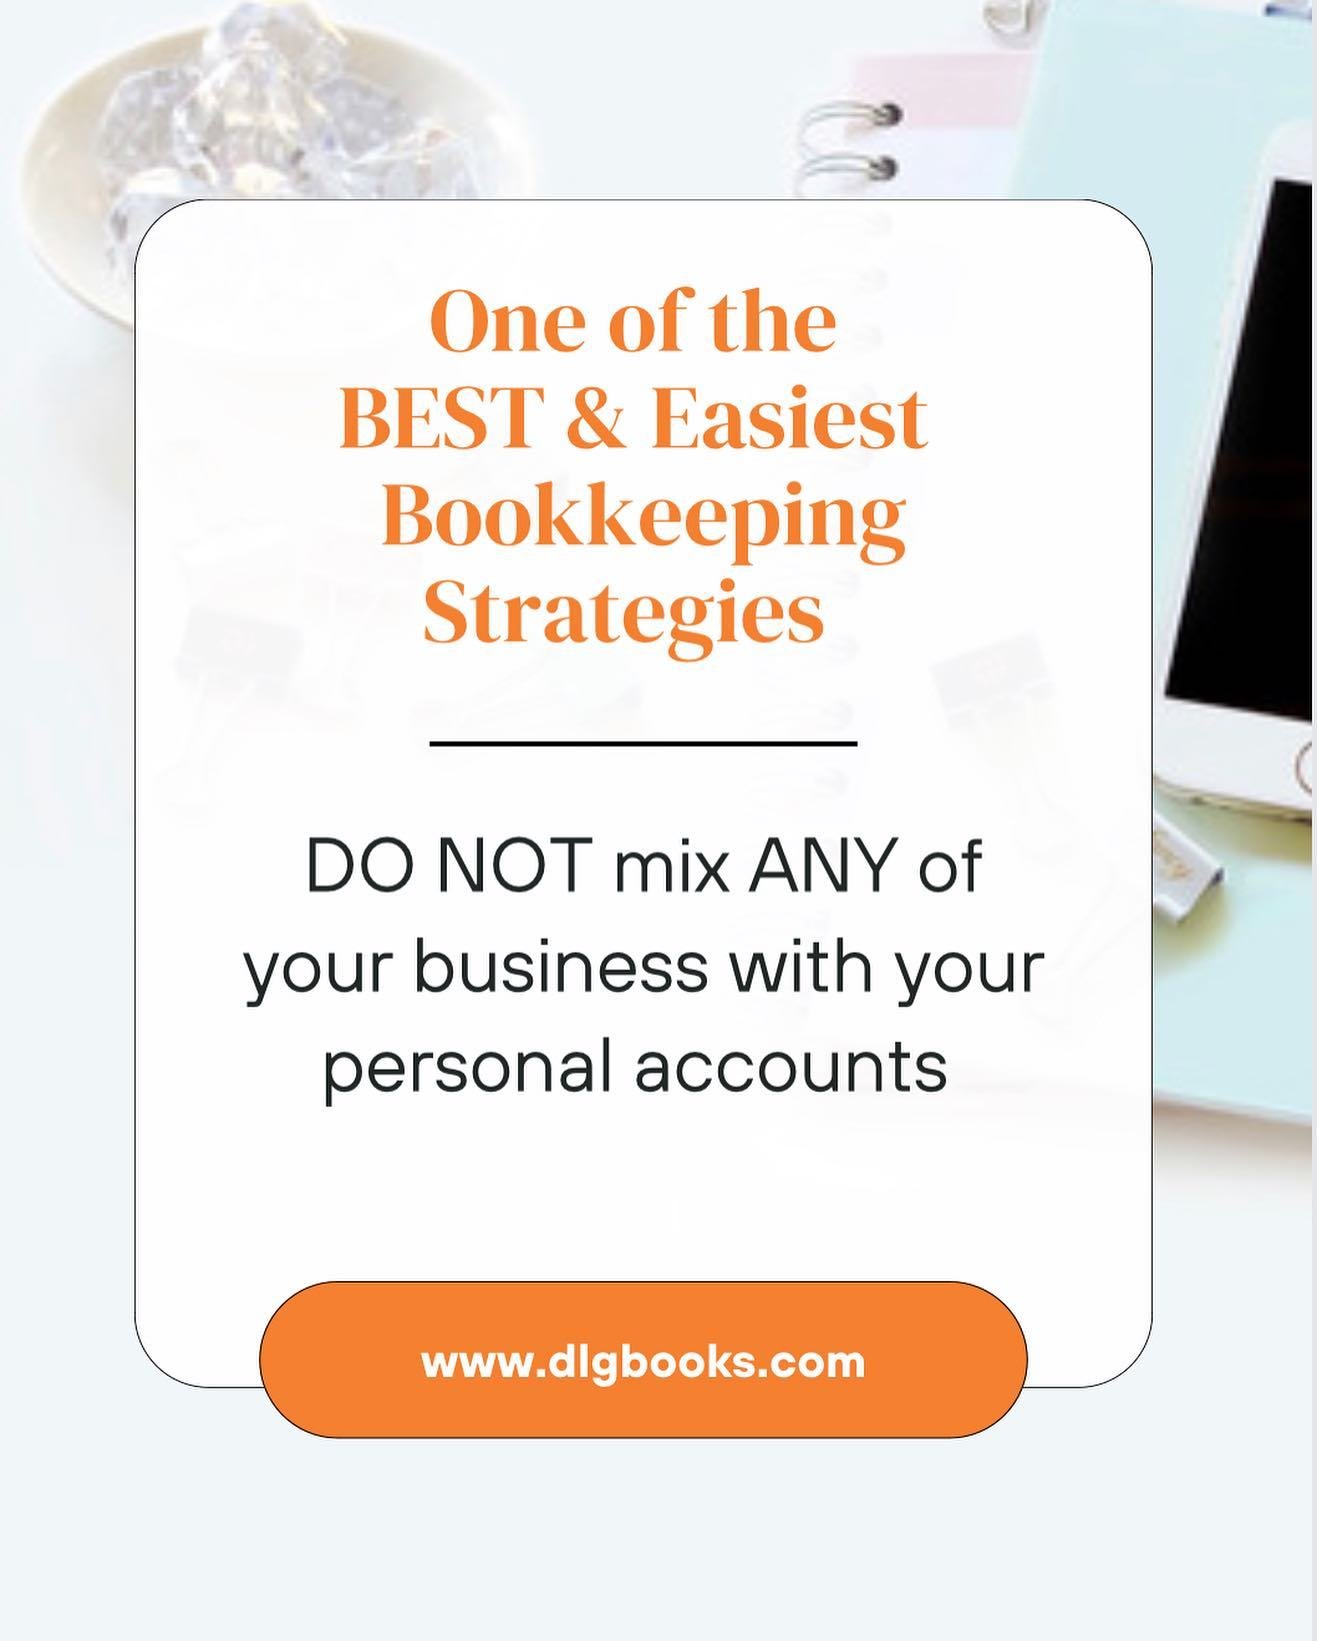 The easier your bookkeeping is, the more likely you are to keep up with it. 

Mixing and mingling causes: 
‼️ - missed deductions 
‼️ - unorganized finances 
‼️ - incorrect profits
‼️ - mismanaged cashflow 
‼️ - never ending bookkeeping &ldquo;to do&